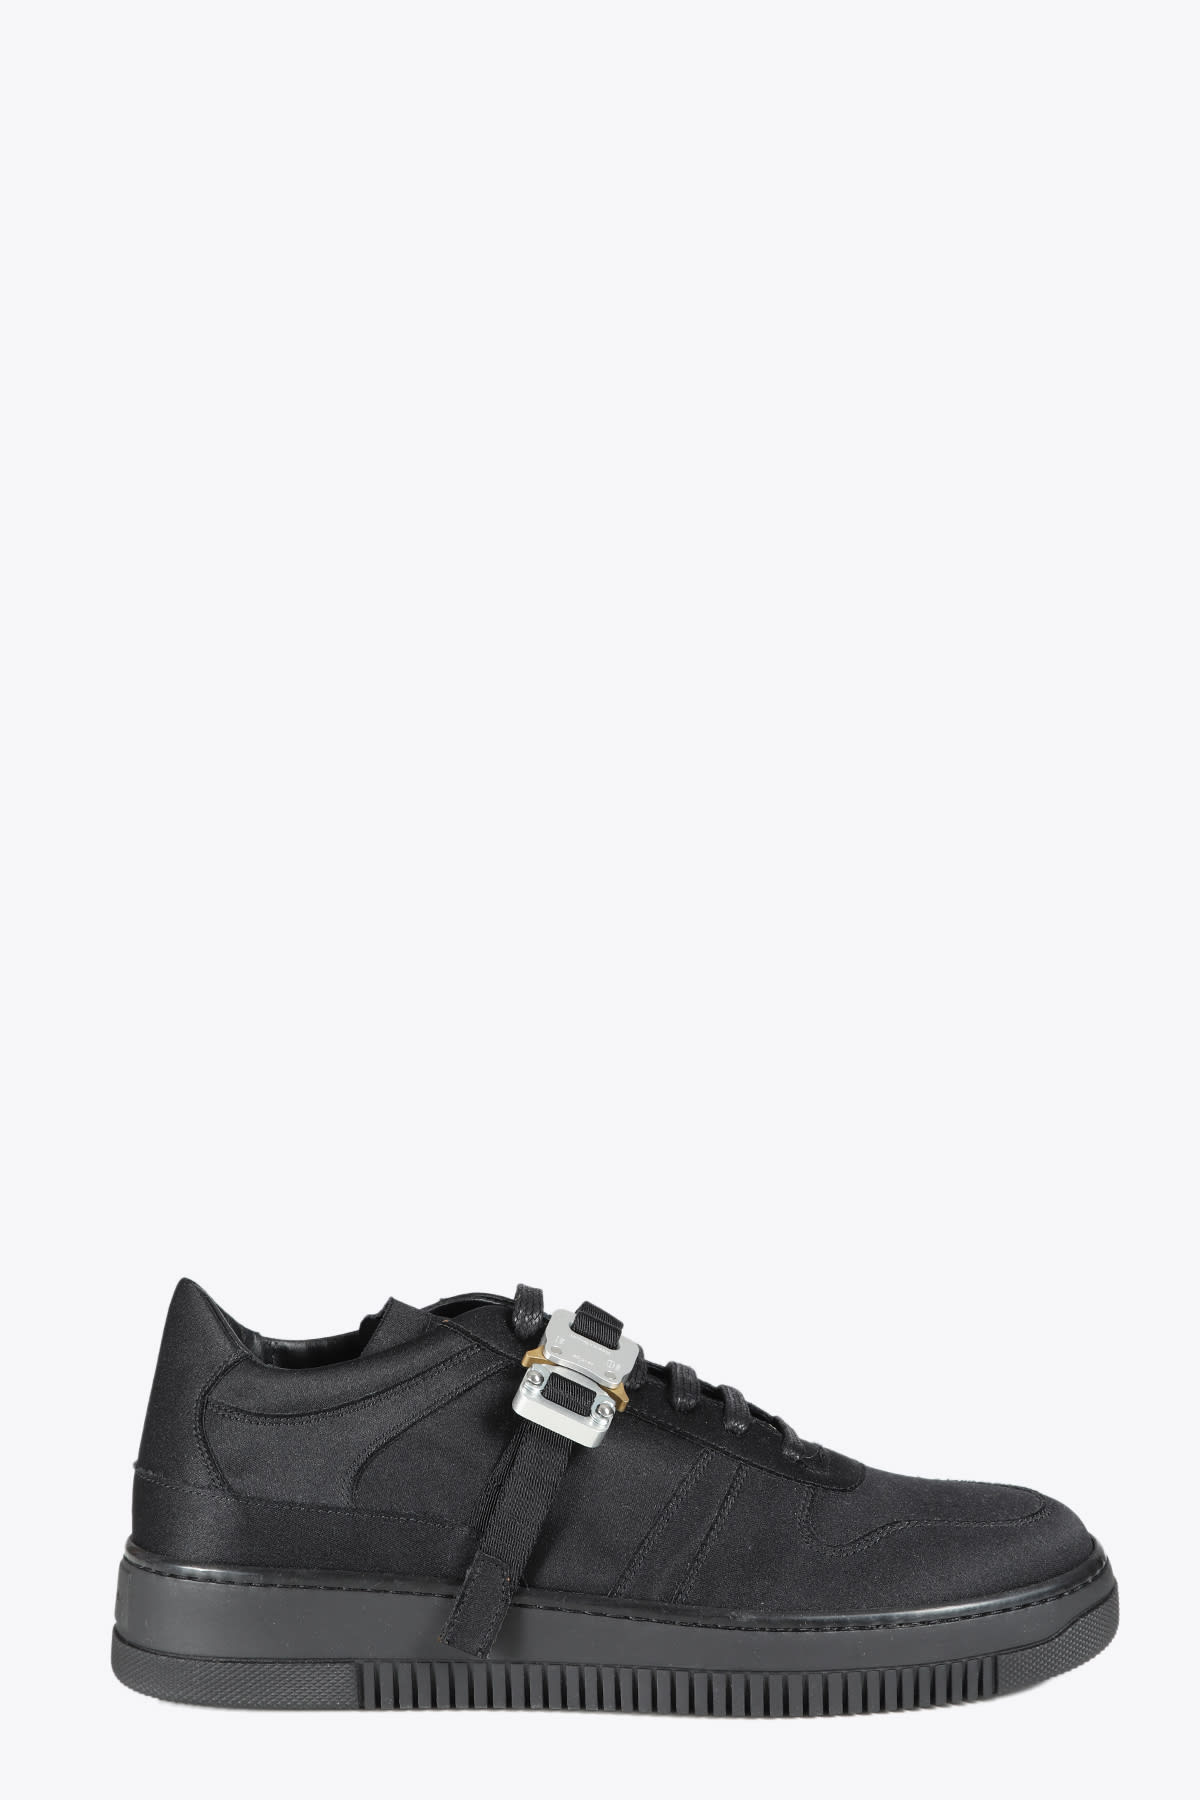 Alyx Leathers SATIN BUCKLE LOW TRAINER